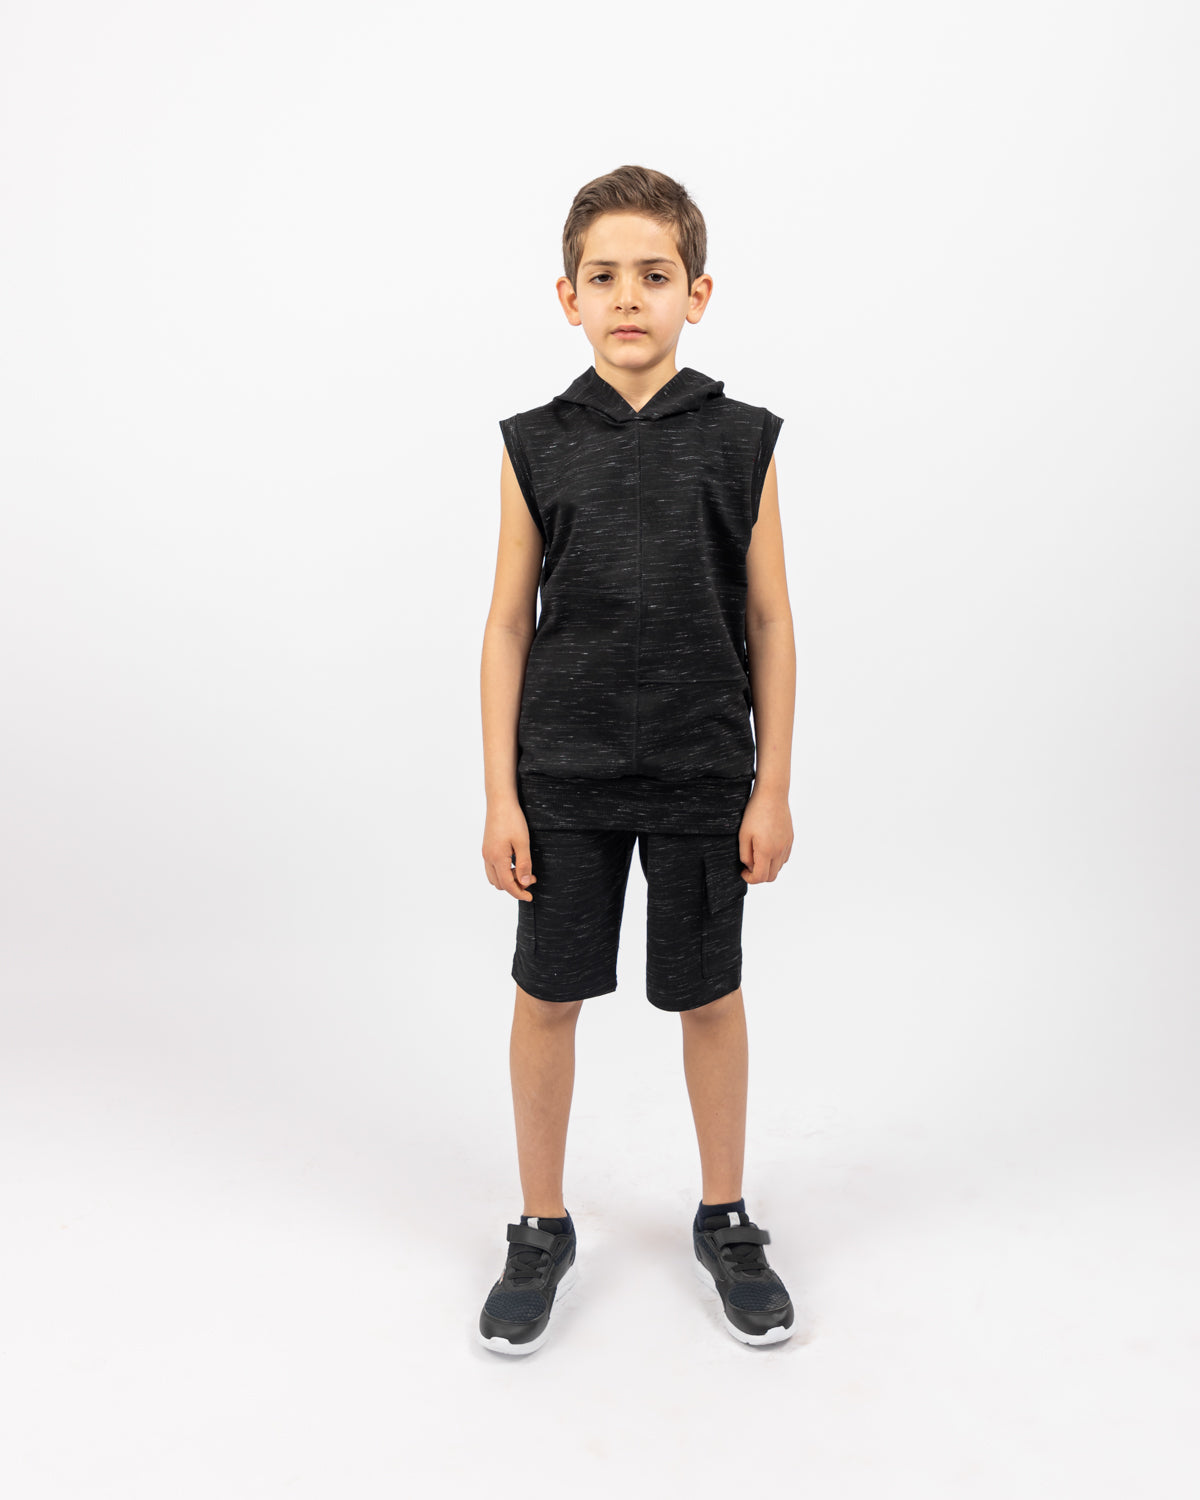 I-Shirt Hoodie Set With Short For Boys - Black